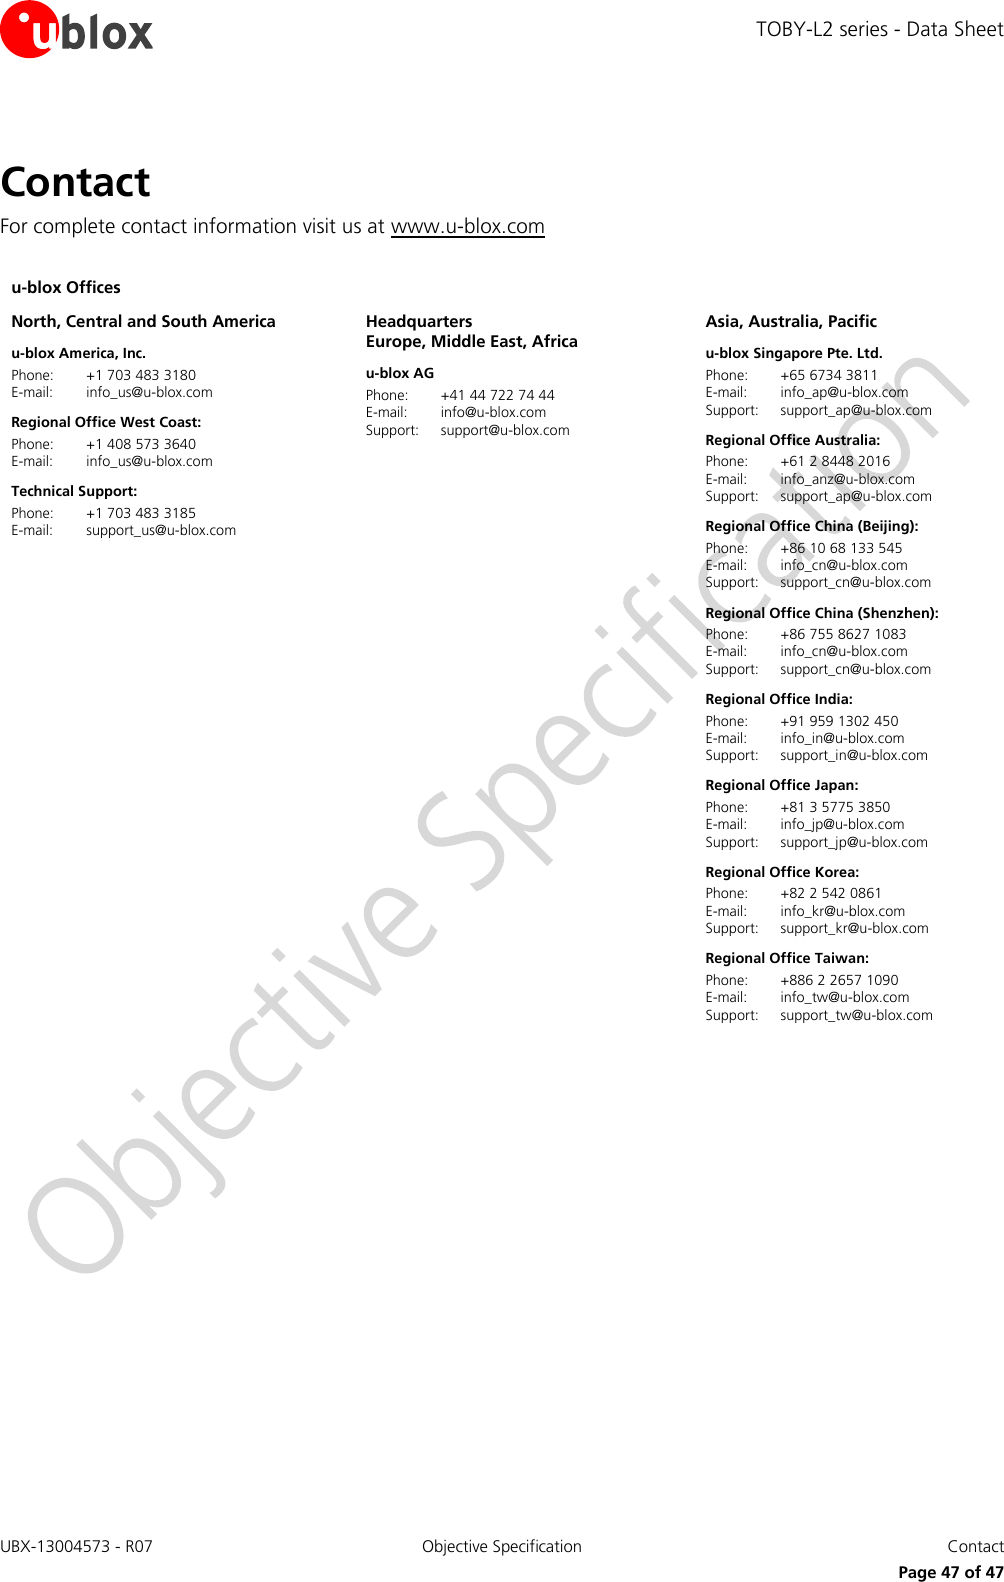 TOBY-L2 series - Data Sheet UBX-13004573 - R07  Objective Specification  Contact   Page 47 of 47 Contact For complete contact information visit us at www.u-blox.com  u-blox Offices     North, Central and South America u-blox America, Inc. Phone:  +1 703 483 3180 E-mail:  info_us@u-blox.com Regional Office West Coast: Phone:  +1 408 573 3640 E-mail:  info_us@u-blox.com Technical Support: Phone:  +1 703 483 3185 E-mail:  support_us@u-blox.com  Headquarters Europe, Middle East, Africa u-blox AG  Phone:  +41 44 722 74 44 E-mail:  info@u-blox.com Support:  support@u-blox.com  Asia, Australia, Pacific u-blox Singapore Pte. Ltd. Phone:  +65 6734 3811 E-mail:  info_ap@u-blox.com Support:  support_ap@u-blox.com Regional Office Australia: Phone:  +61 2 8448 2016 E-mail:  info_anz@u-blox.com Support:  support_ap@u-blox.com Regional Office China (Beijing): Phone:  +86 10 68 133 545 E-mail:  info_cn@u-blox.com Support:  support_cn@u-blox.com Regional Office China (Shenzhen): Phone:  +86 755 8627 1083 E-mail:  info_cn@u-blox.com Support:  support_cn@u-blox.com Regional Office India: Phone:  +91 959 1302 450 E-mail:  info_in@u-blox.com Support:  support_in@u-blox.com Regional Office Japan: Phone:  +81 3 5775 3850 E-mail:  info_jp@u-blox.com Support:  support_jp@u-blox.com Regional Office Korea: Phone:  +82 2 542 0861 E-mail:  info_kr@u-blox.com  Support:  support_kr@u-blox.com Regional Office Taiwan: Phone:  +886 2 2657 1090 E-mail:  info_tw@u-blox.com  Support:  support_tw@u-blox.com   